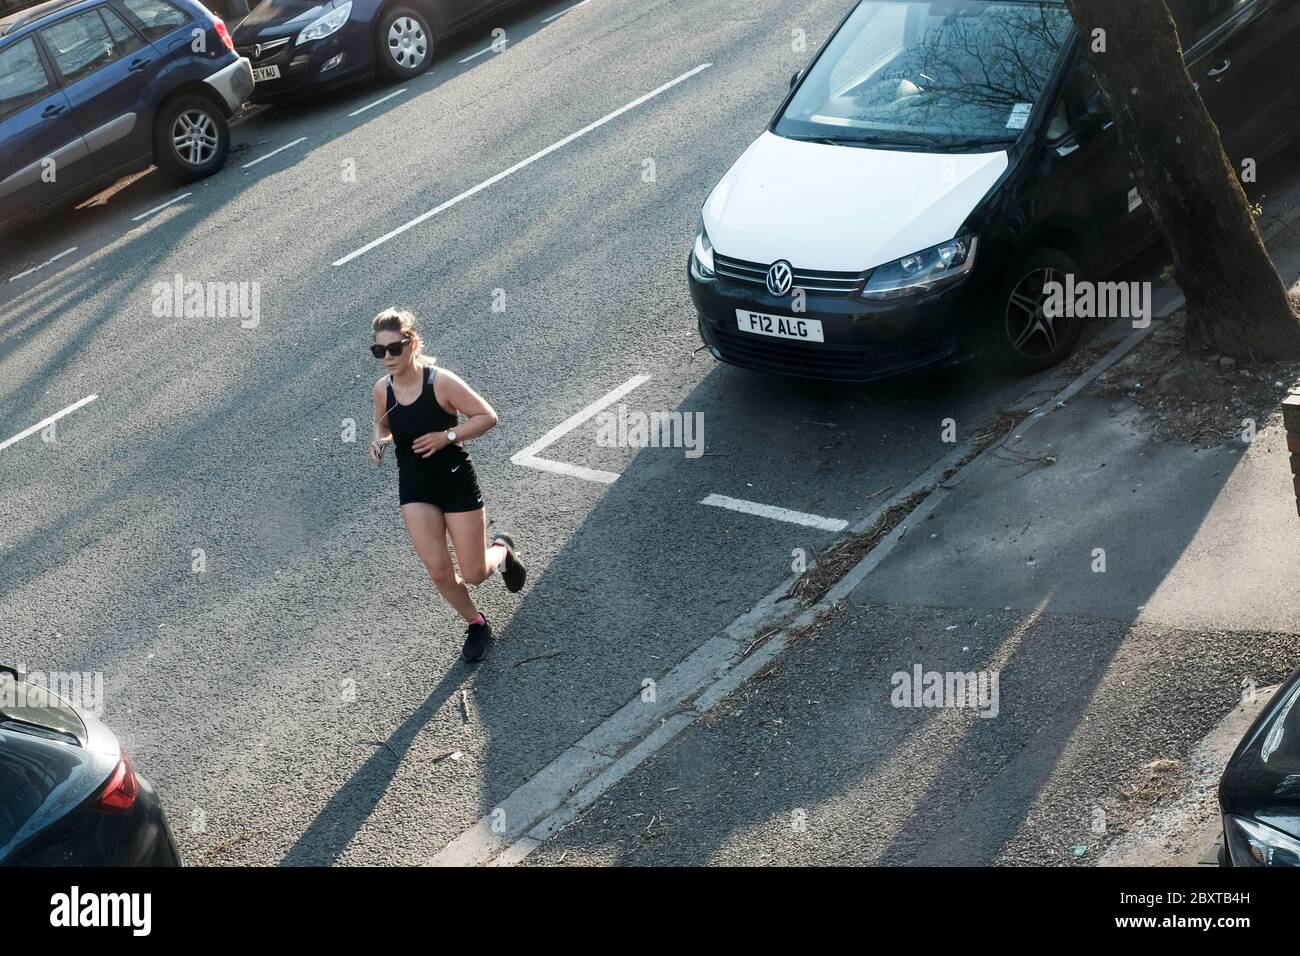 One hour of exercise allowed during the lockdown coronavirus pandemic. Cardiff 2020 Stock Photo